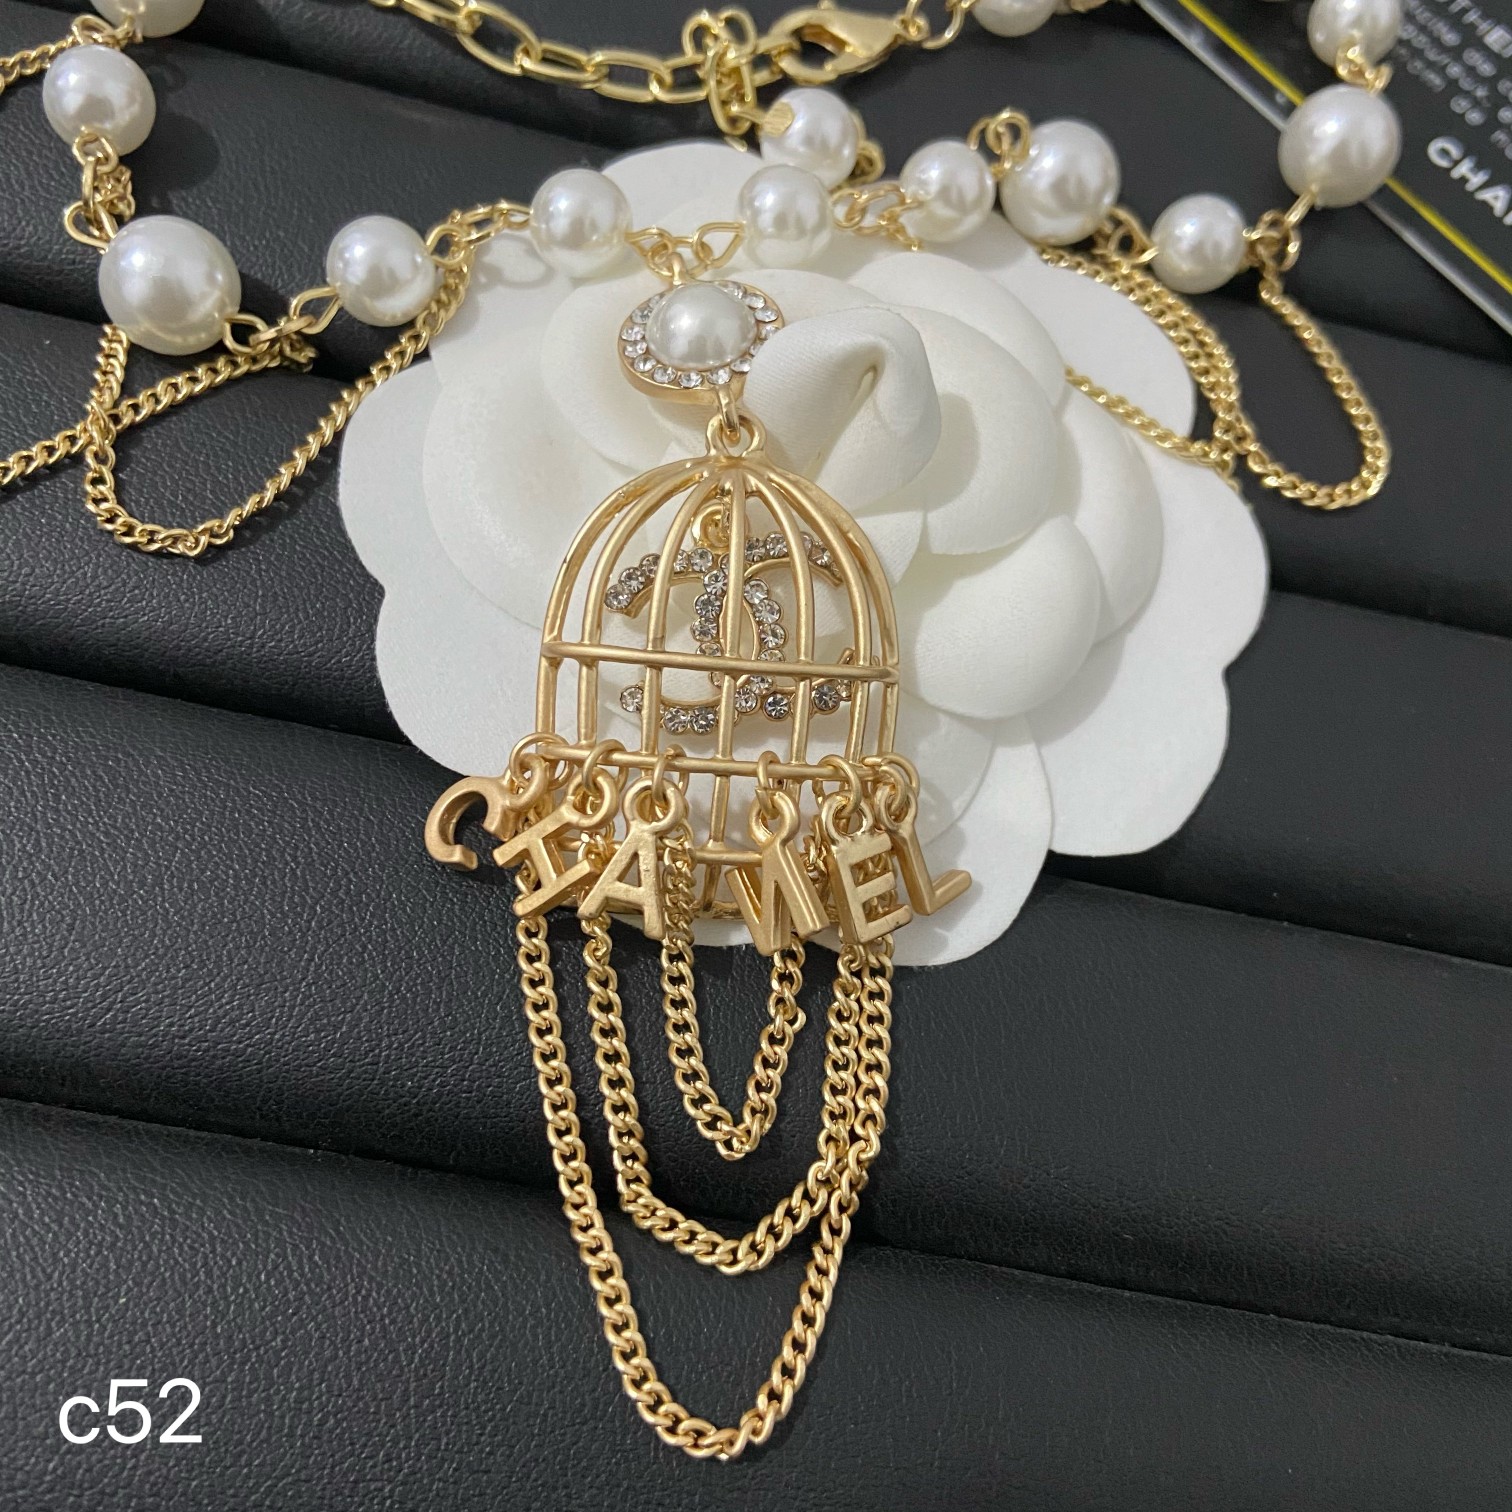 Chanel necklace 107516